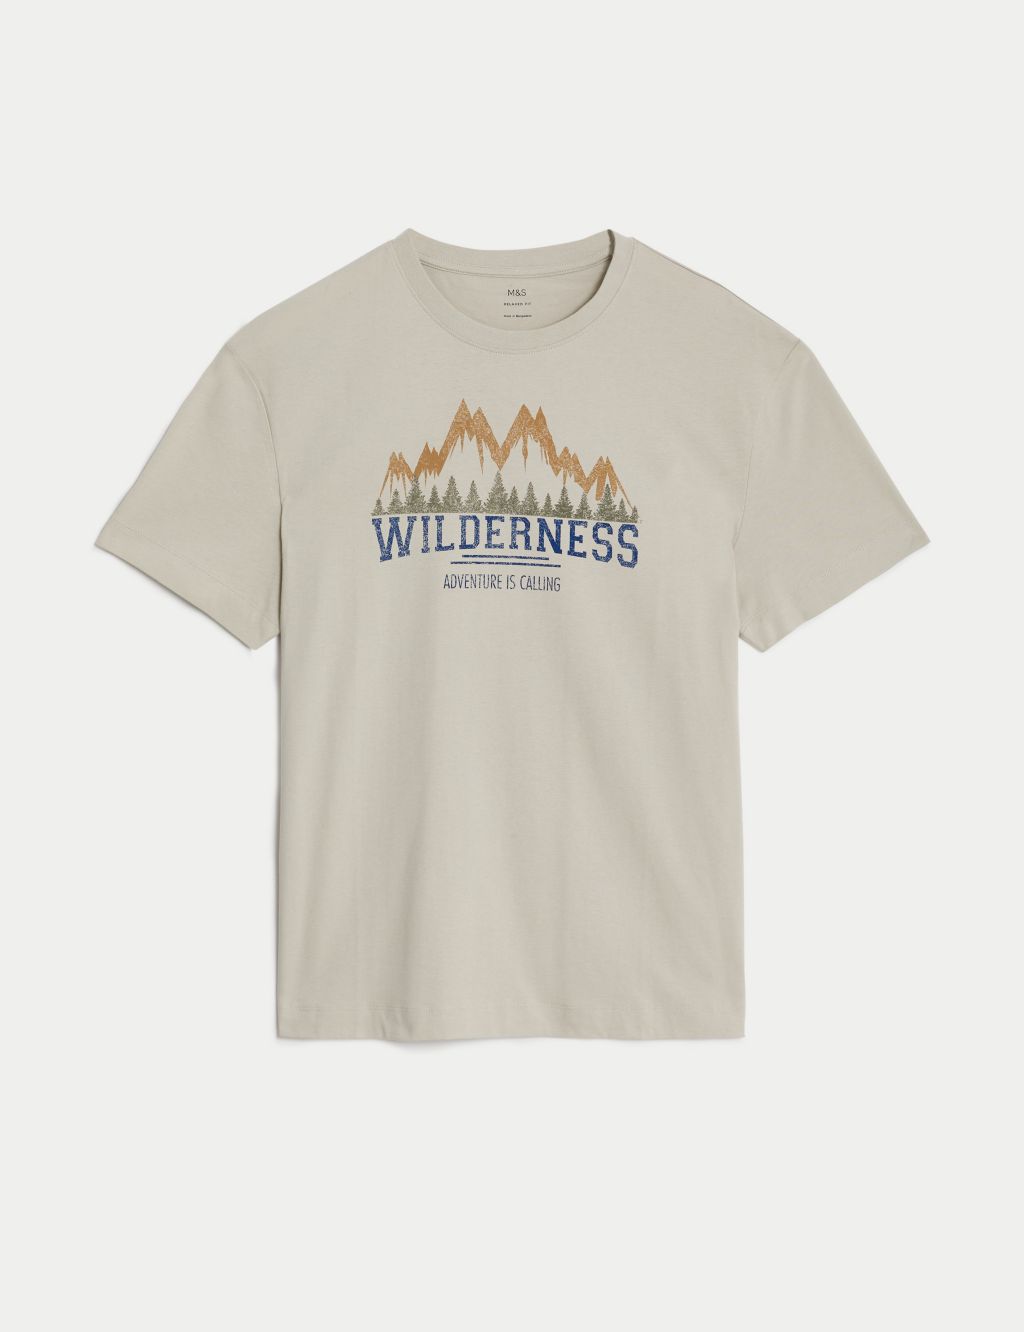 Relaxed Fit Pure Cotton Wilderness T-Shirt image 2